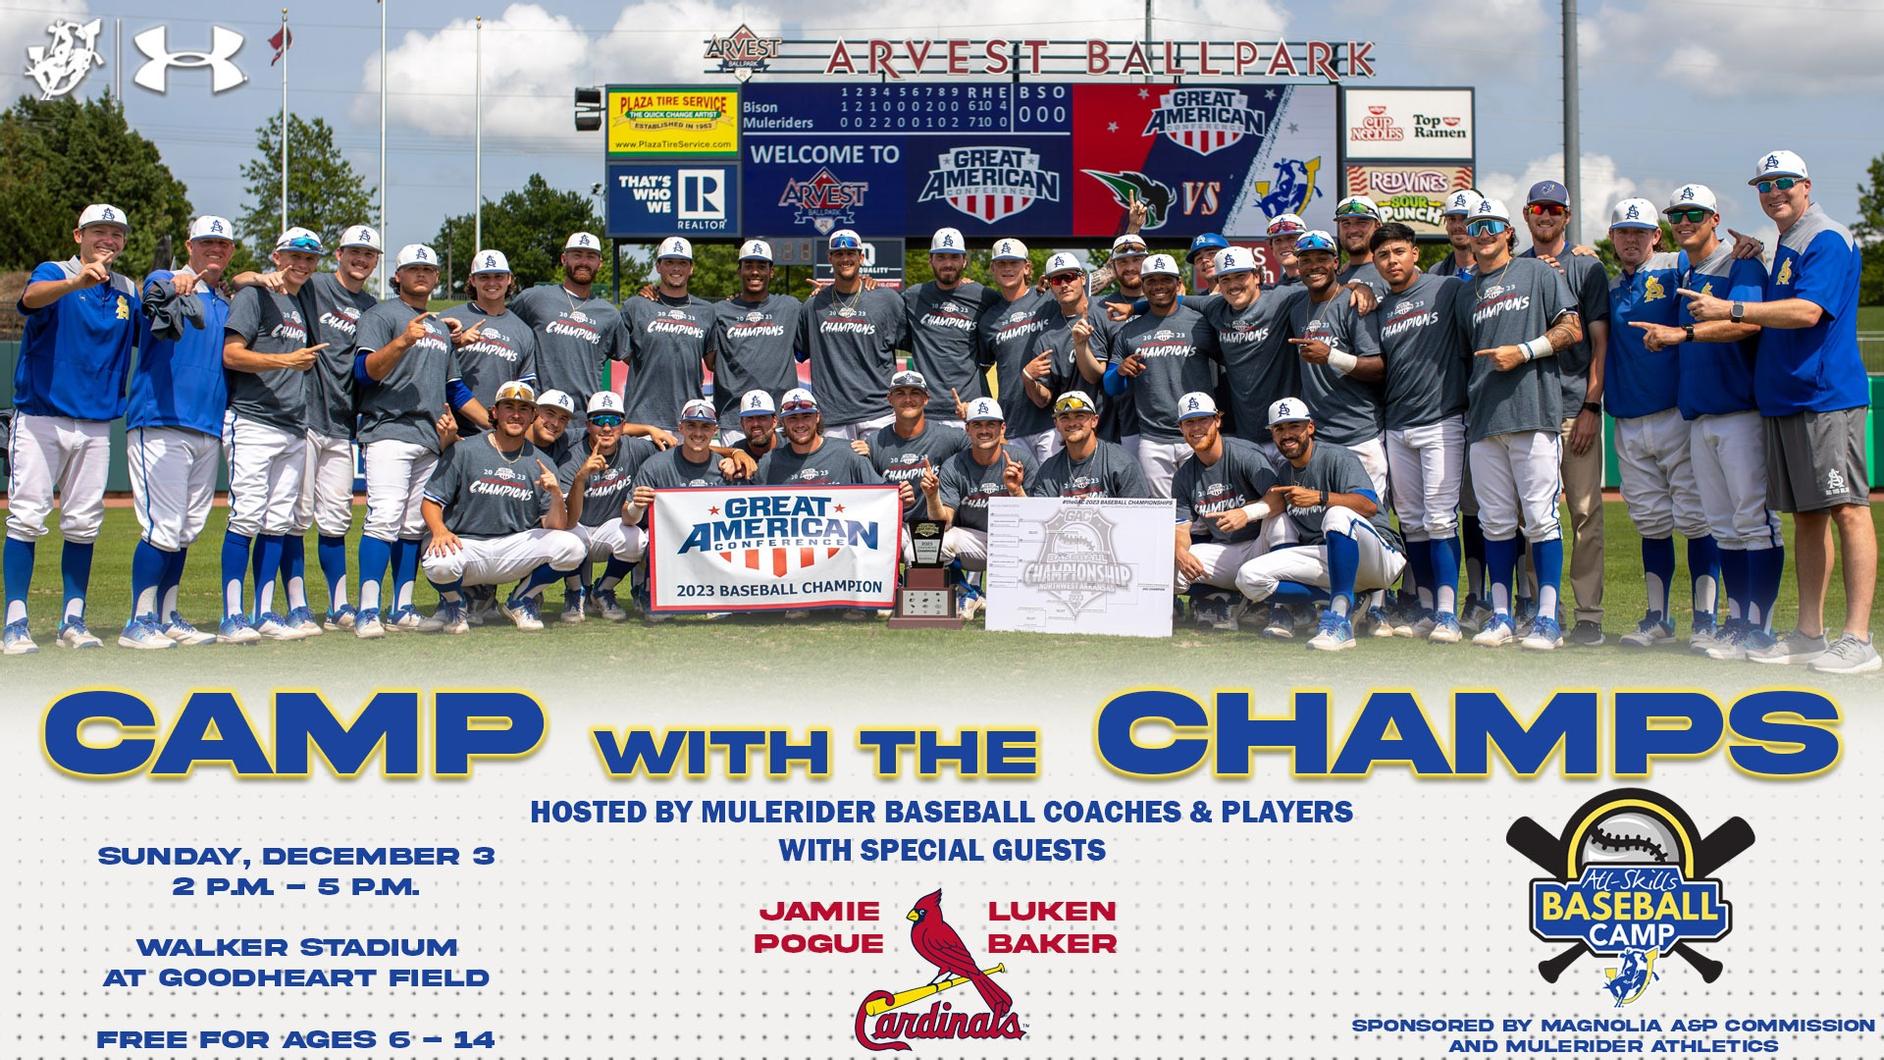 “Camp with the Champs” returns to Walker Stadium on December 3